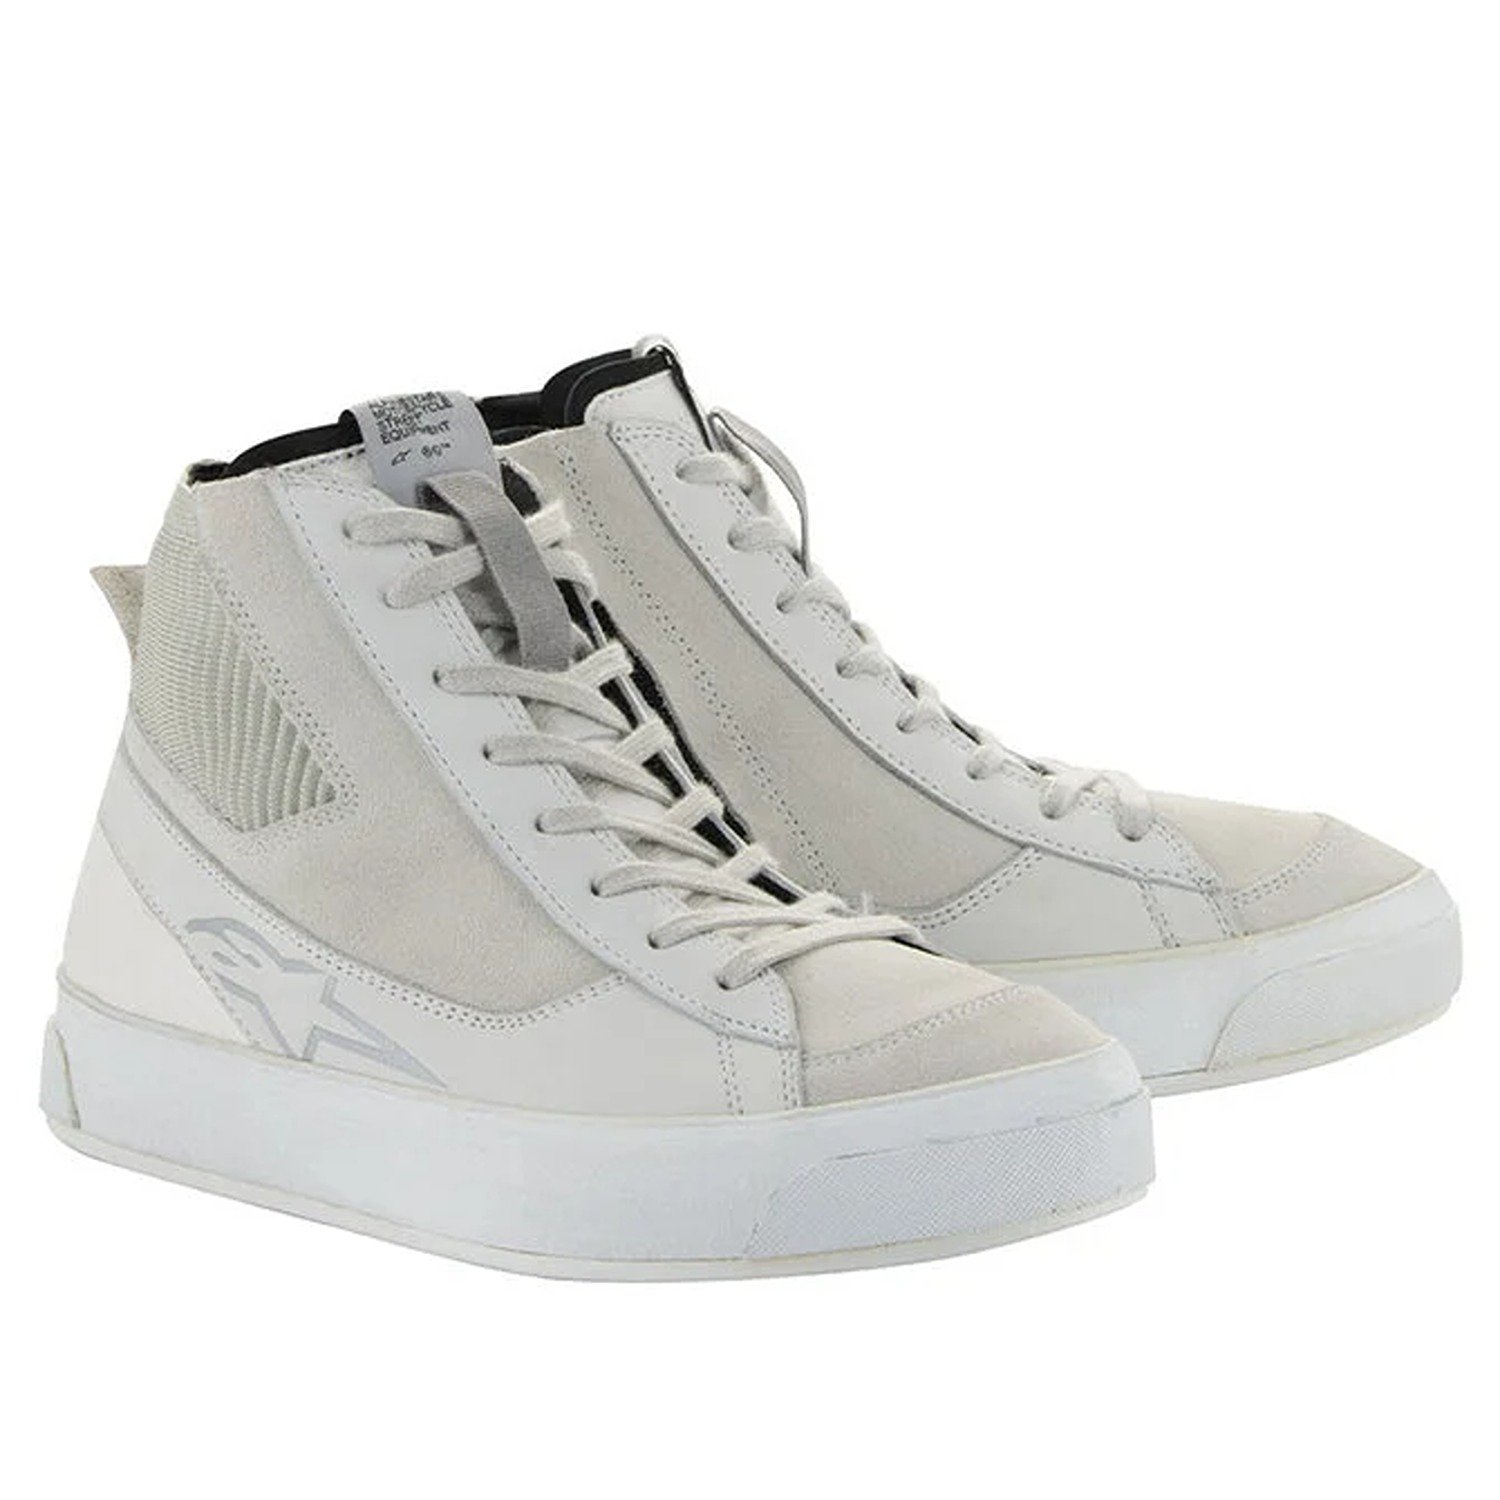 Image of Alpinestars Stella Stated Podium Shoes White Cool Gray Taille US 95